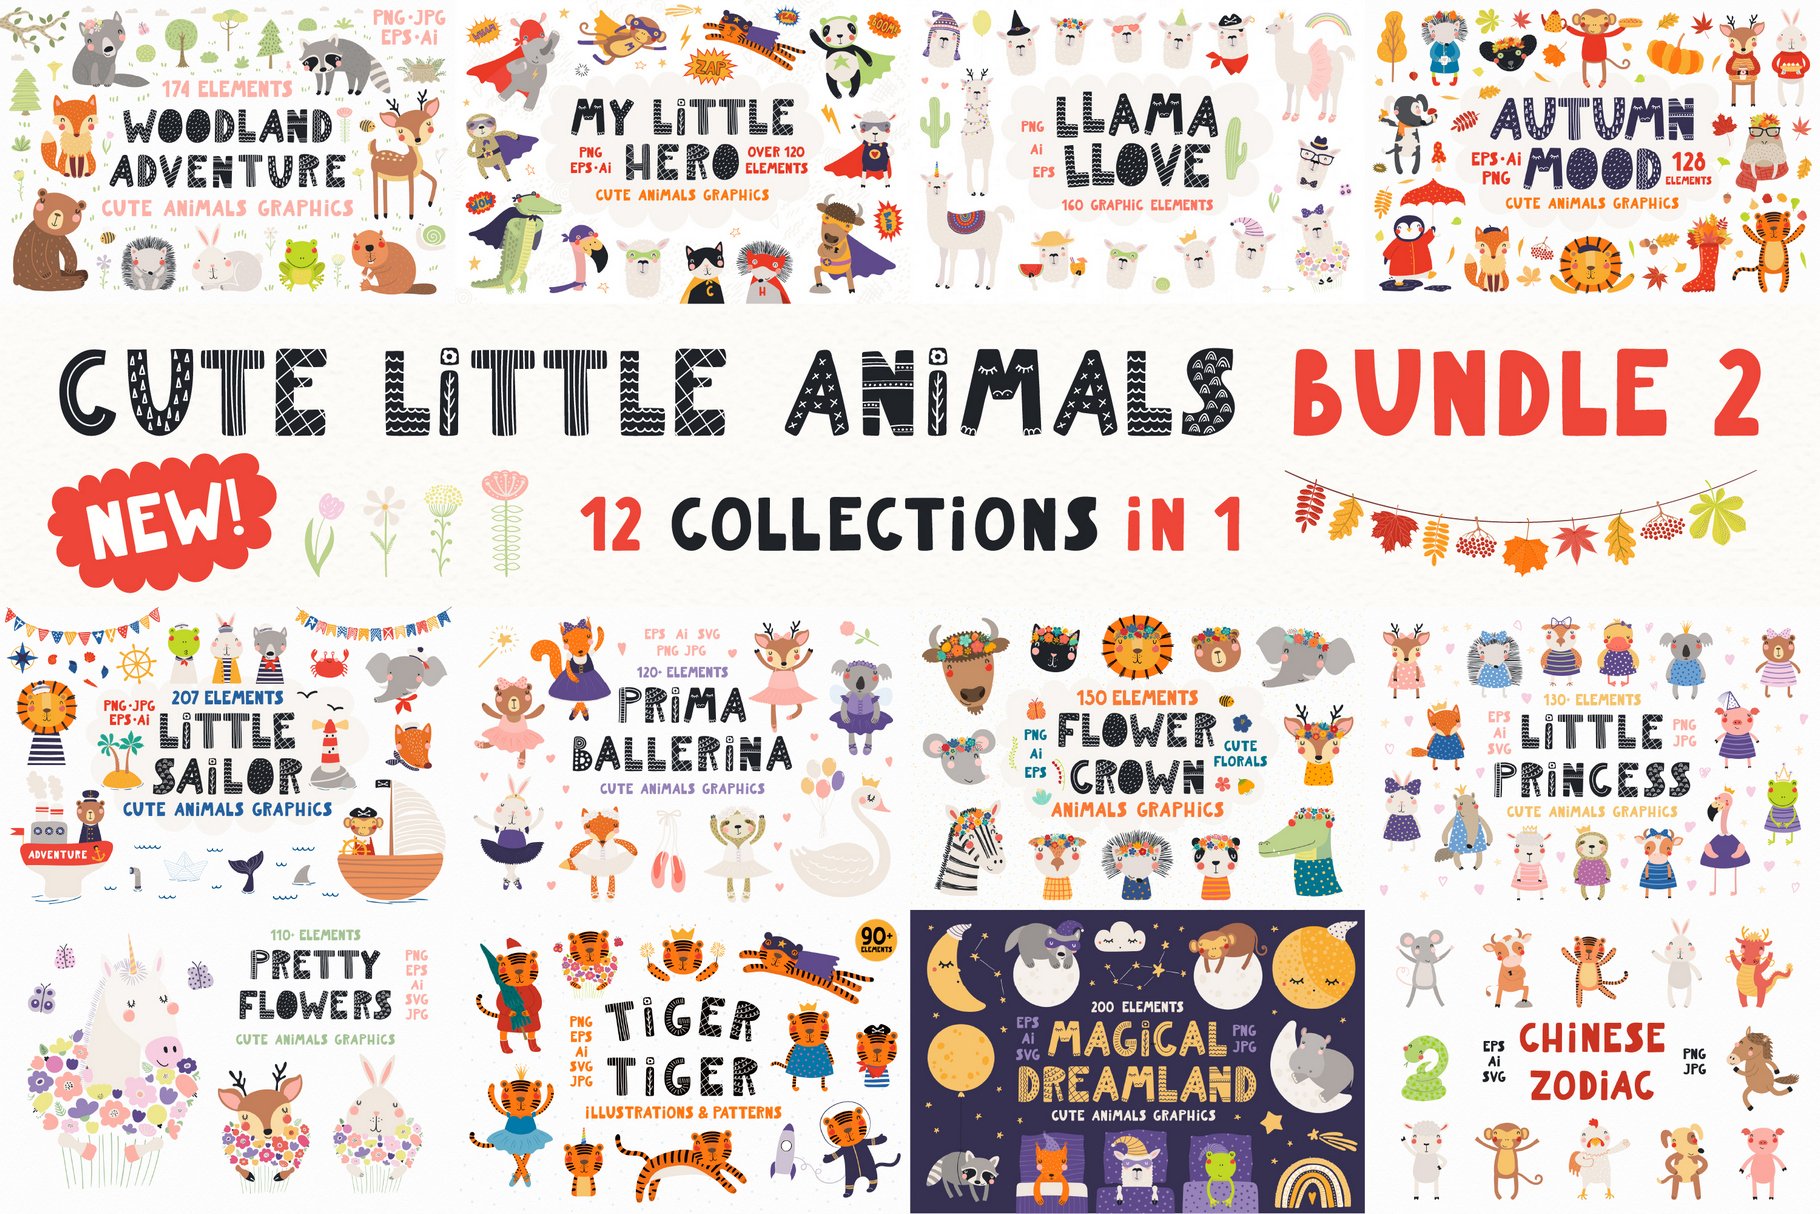 Cute Little Animals Graphic Bundle 2 cover image.